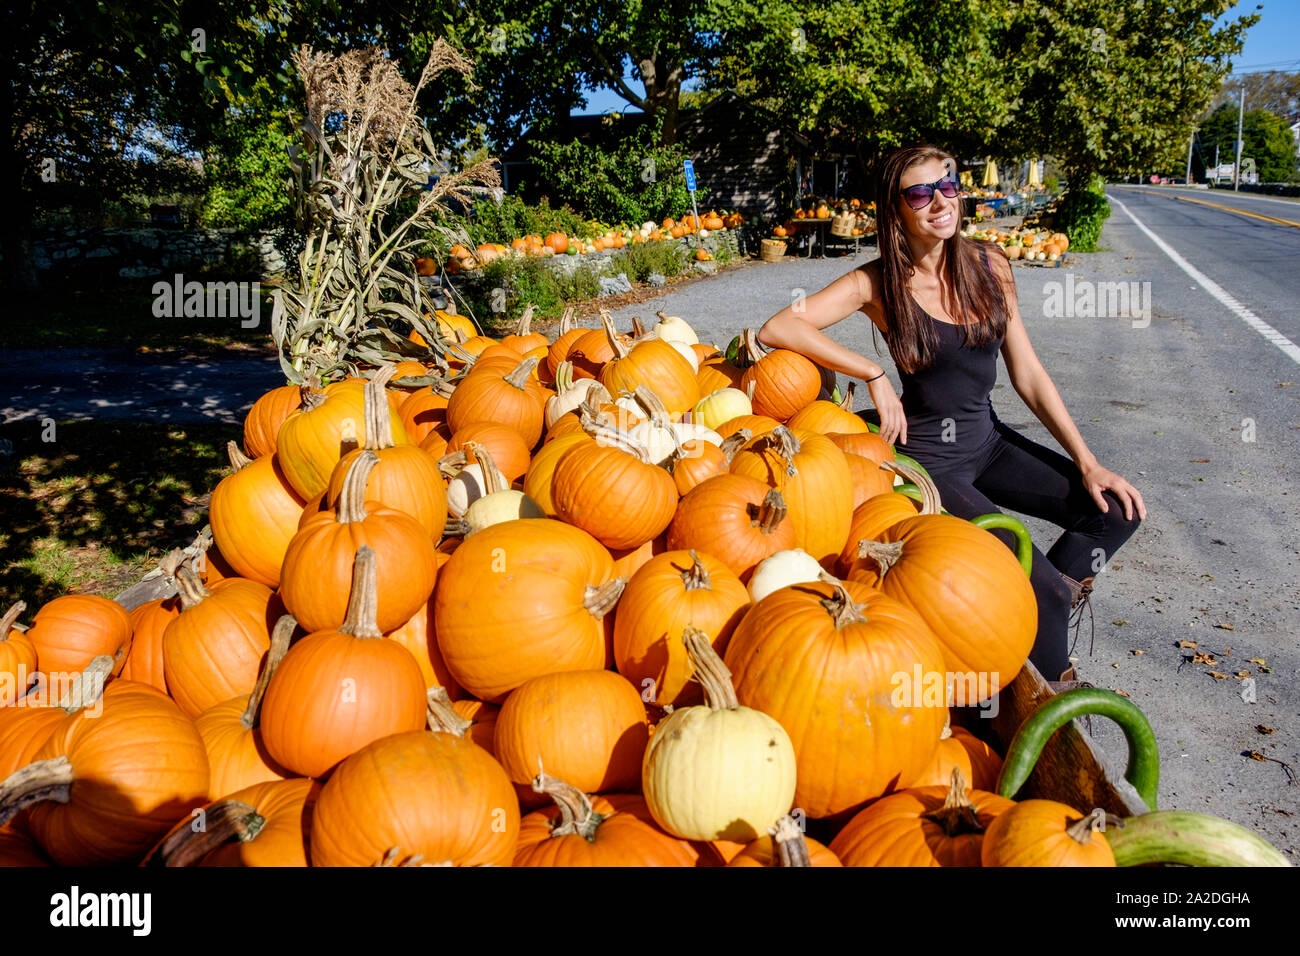 Pumpkins and other produce displayed at Walkers Roadside Stand at 261 W Main Rd 02837 Little Compton, Rhode Island, USA Stock Photo